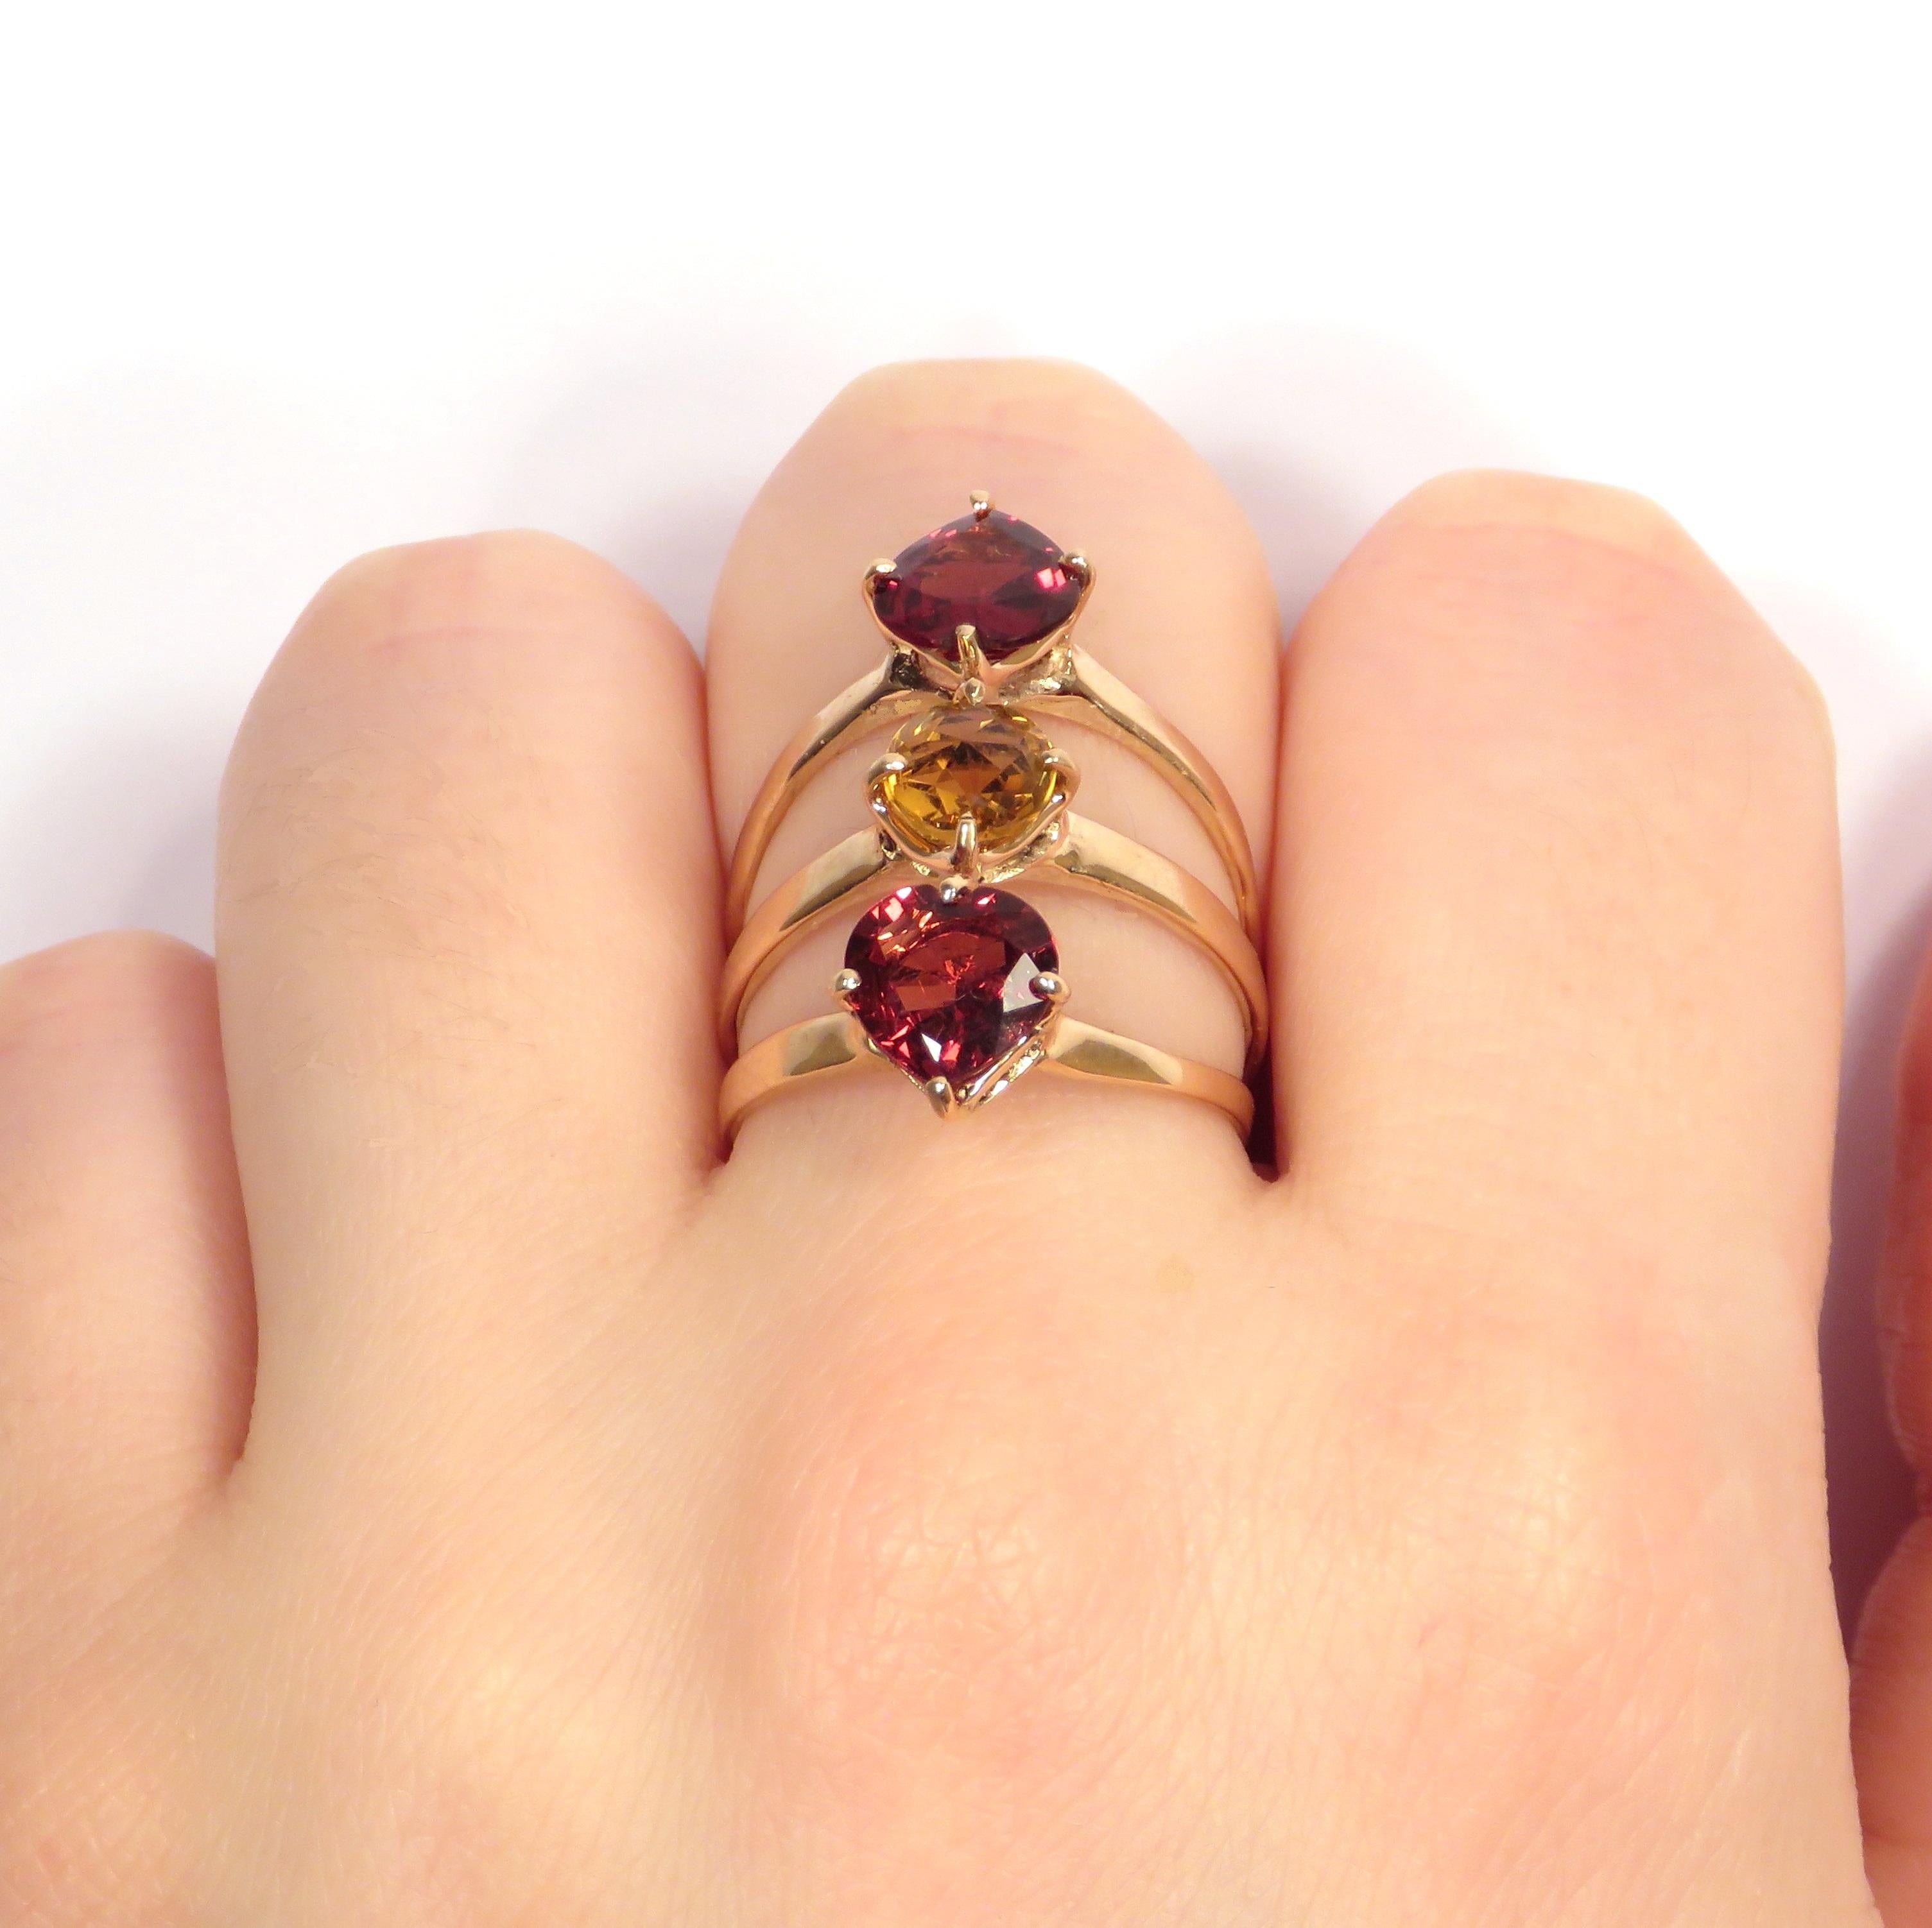 Heart Cut Garnet Rose Cut Citrine 9 Karat Rose Gold Ring Handcrafted in Italy For Sale 2